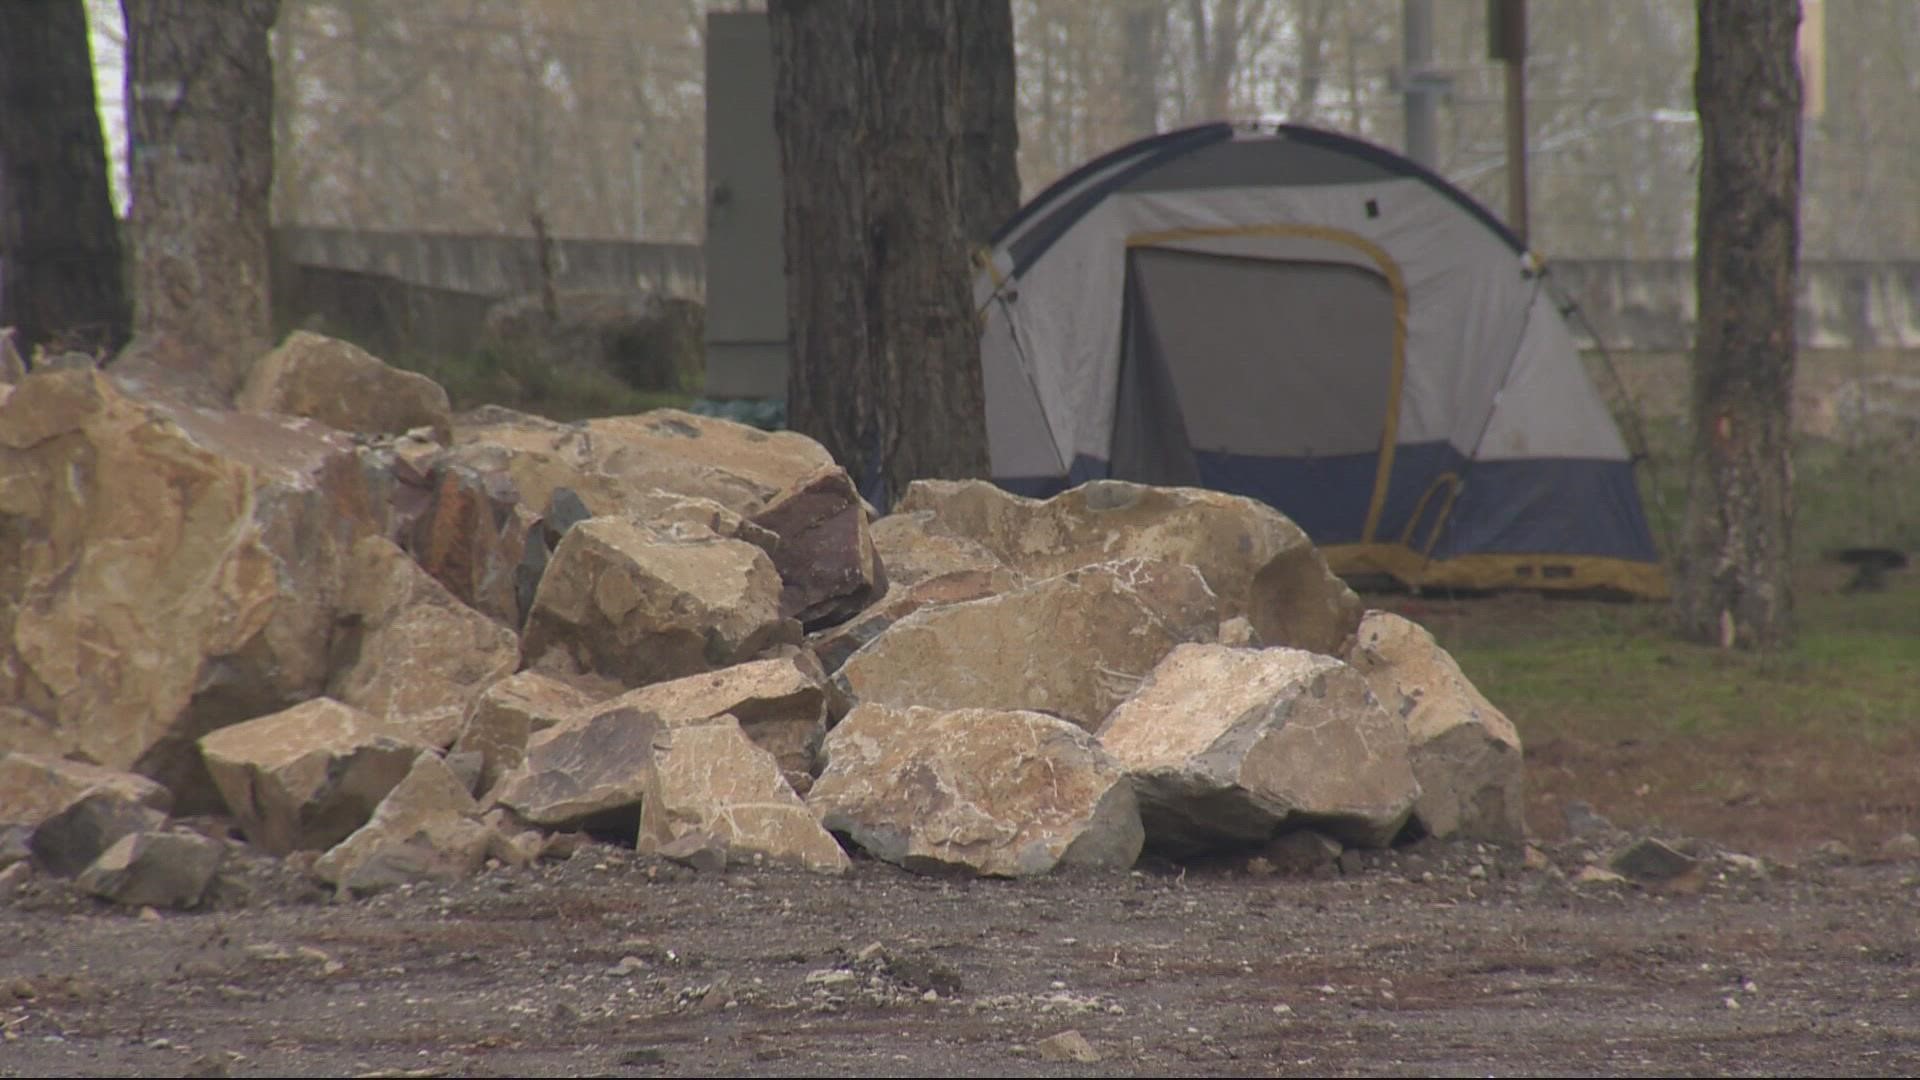 ODOT is using taxpayer dollars to install these boulders but increased crime in downtown Portland is pushing homeless people out and near freeways